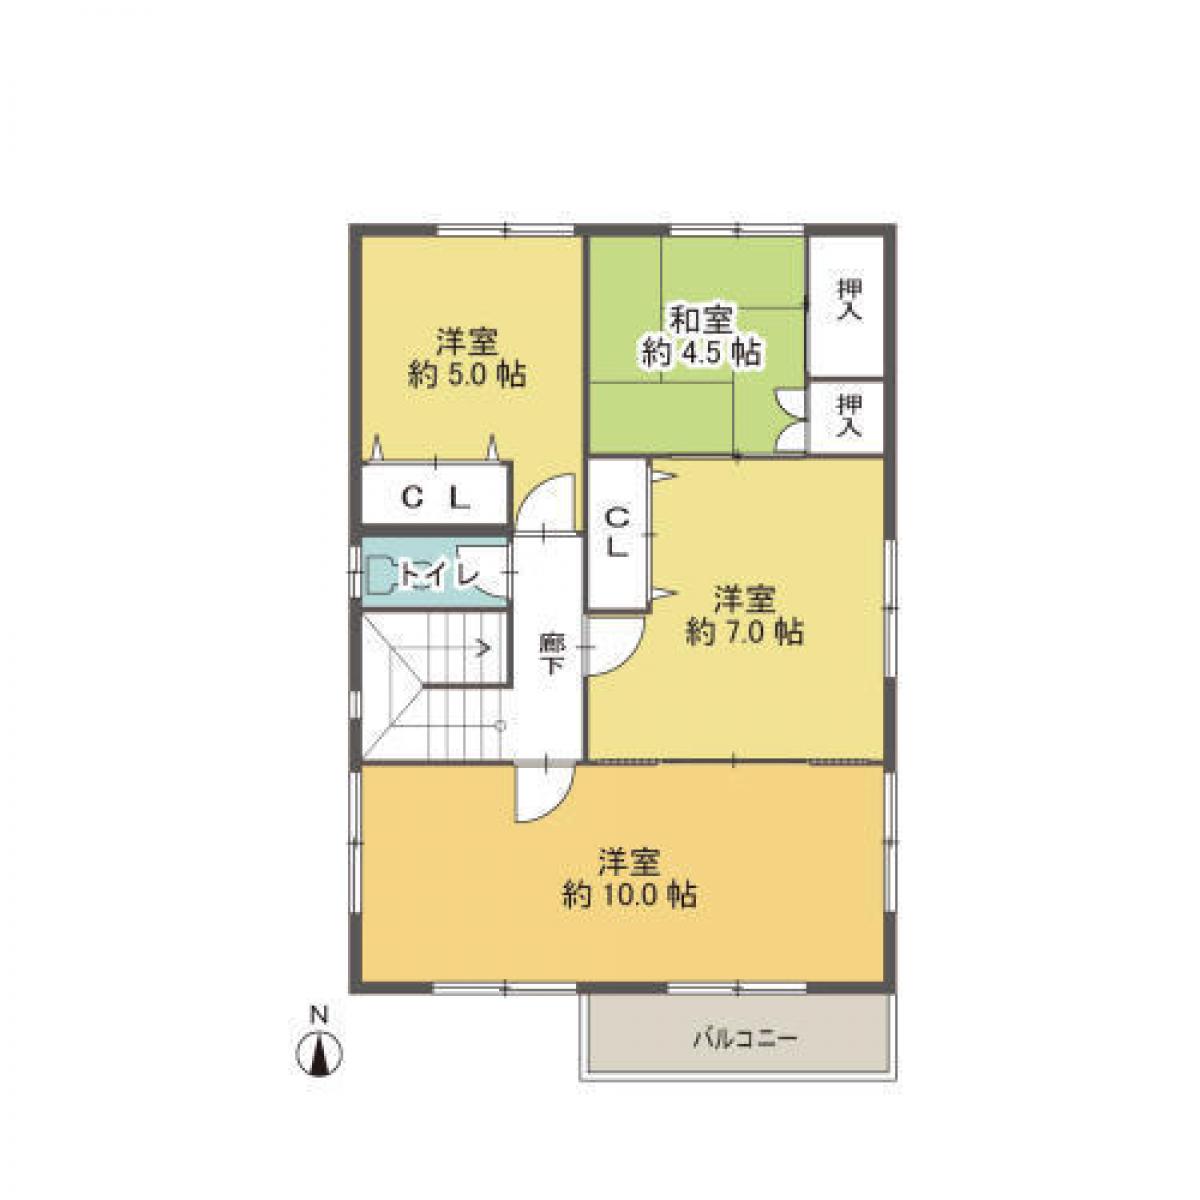 Picture of Home For Sale in Aisai Shi, Aichi, Japan